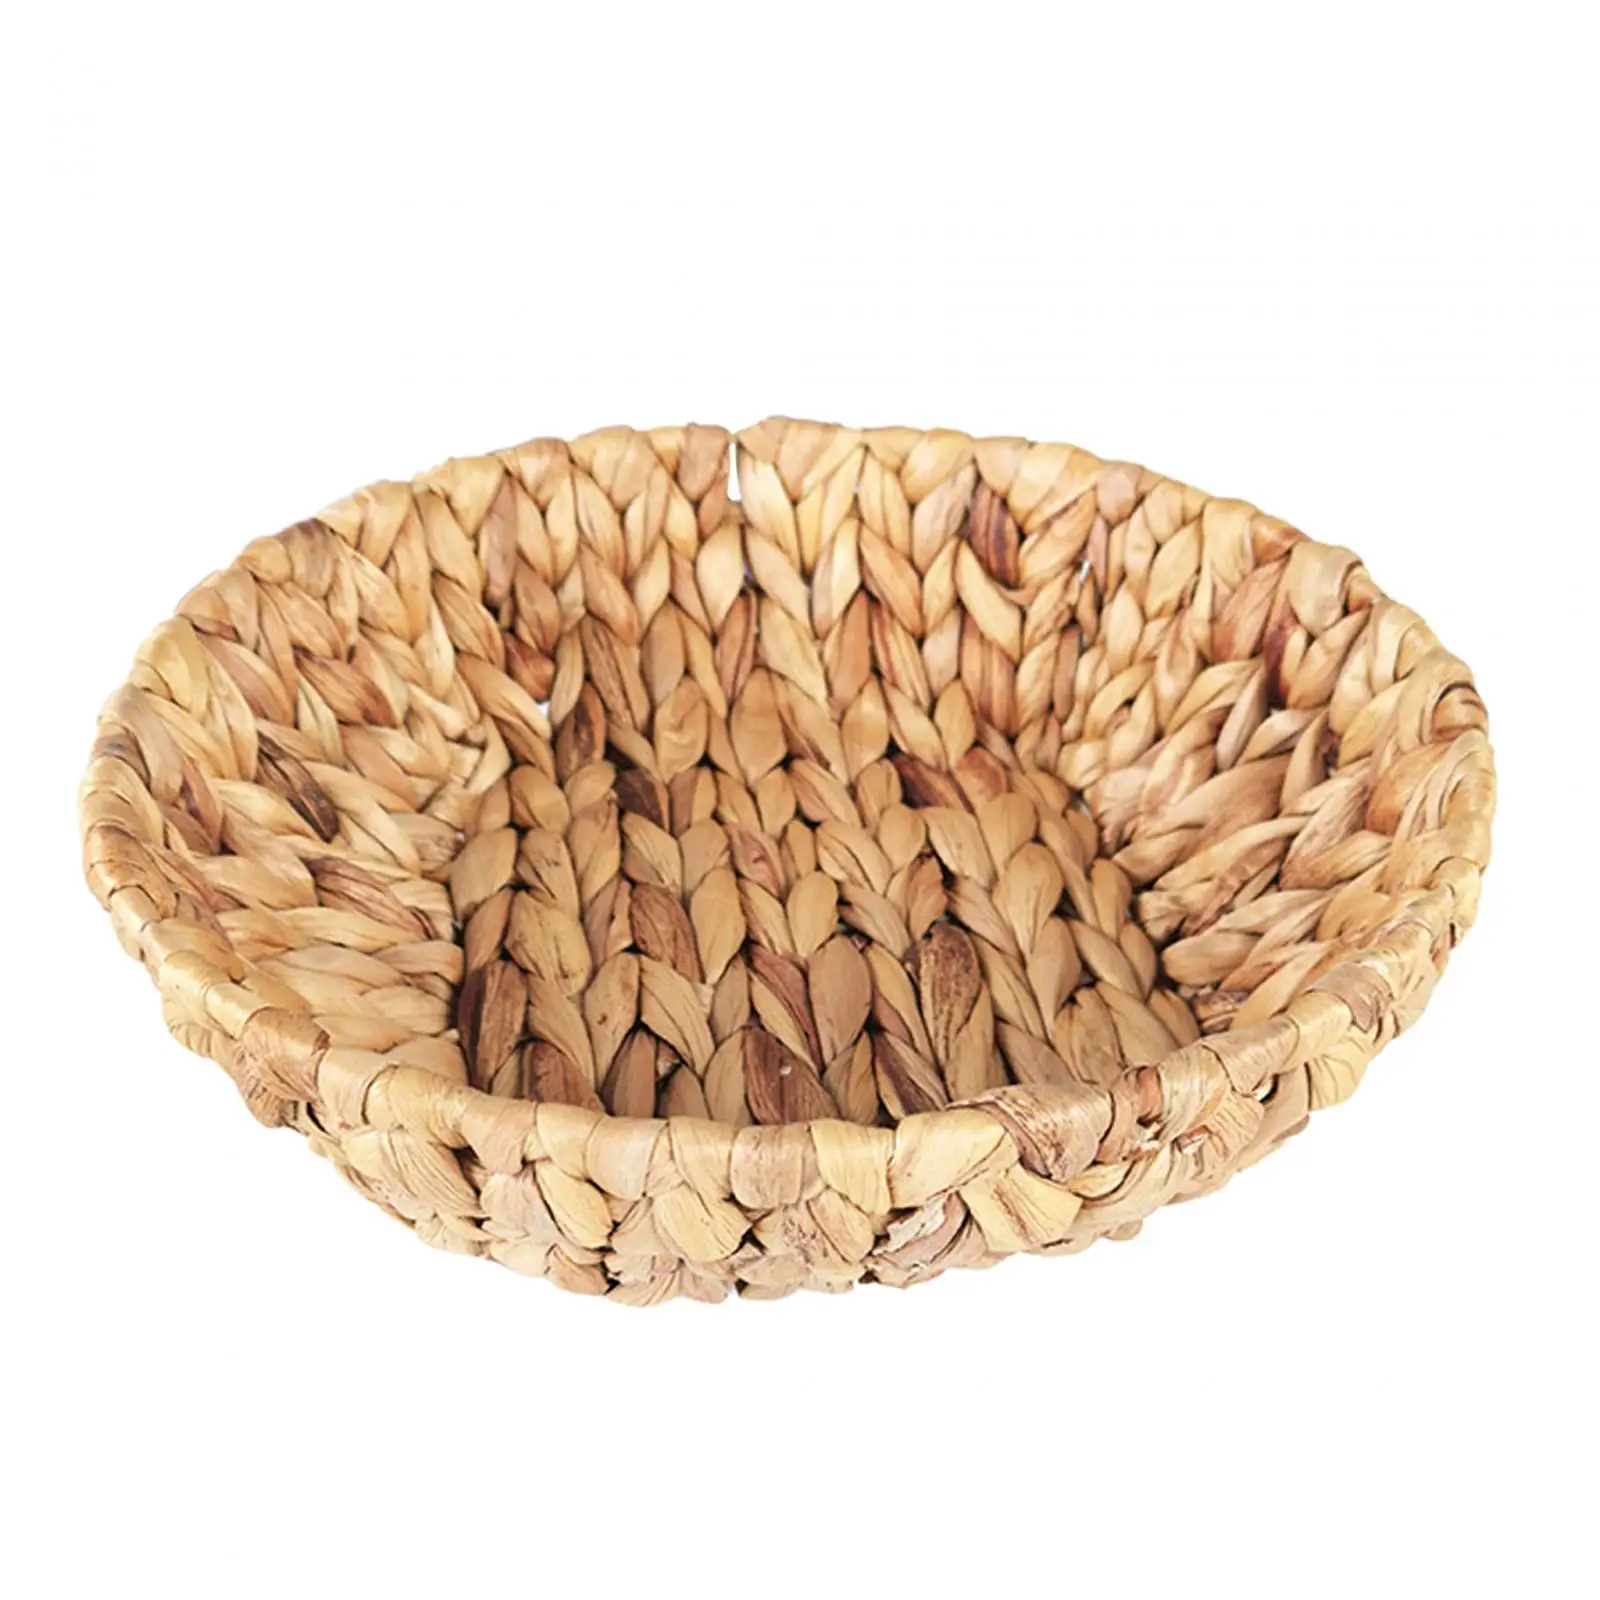 Snack Candy Storage Basket Woven Seagrass Tray Wicker Serving Tray for Fruit Dinner Bread Vegetable